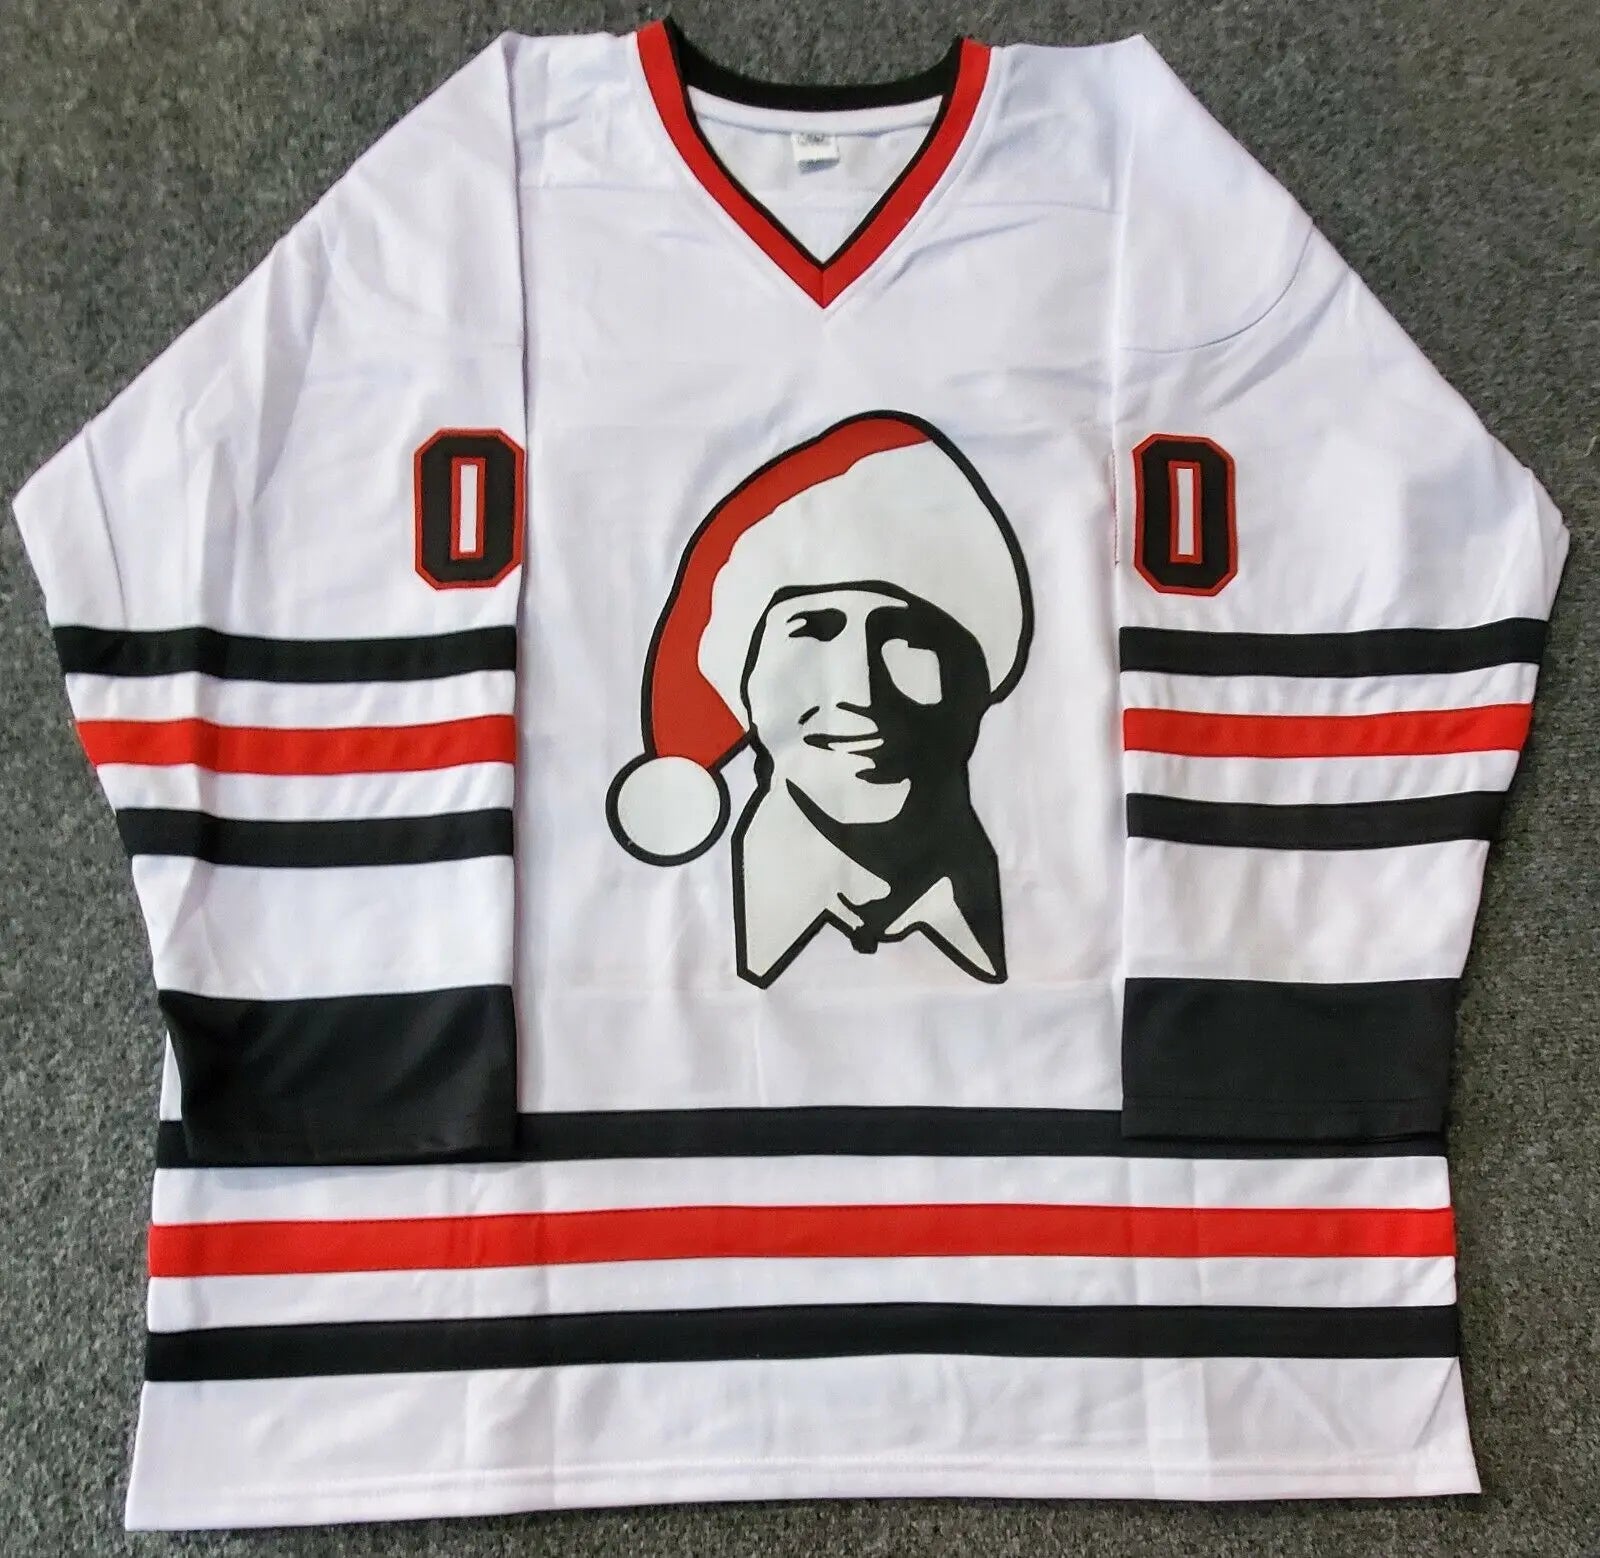 christmas clark griswold wearing jersey